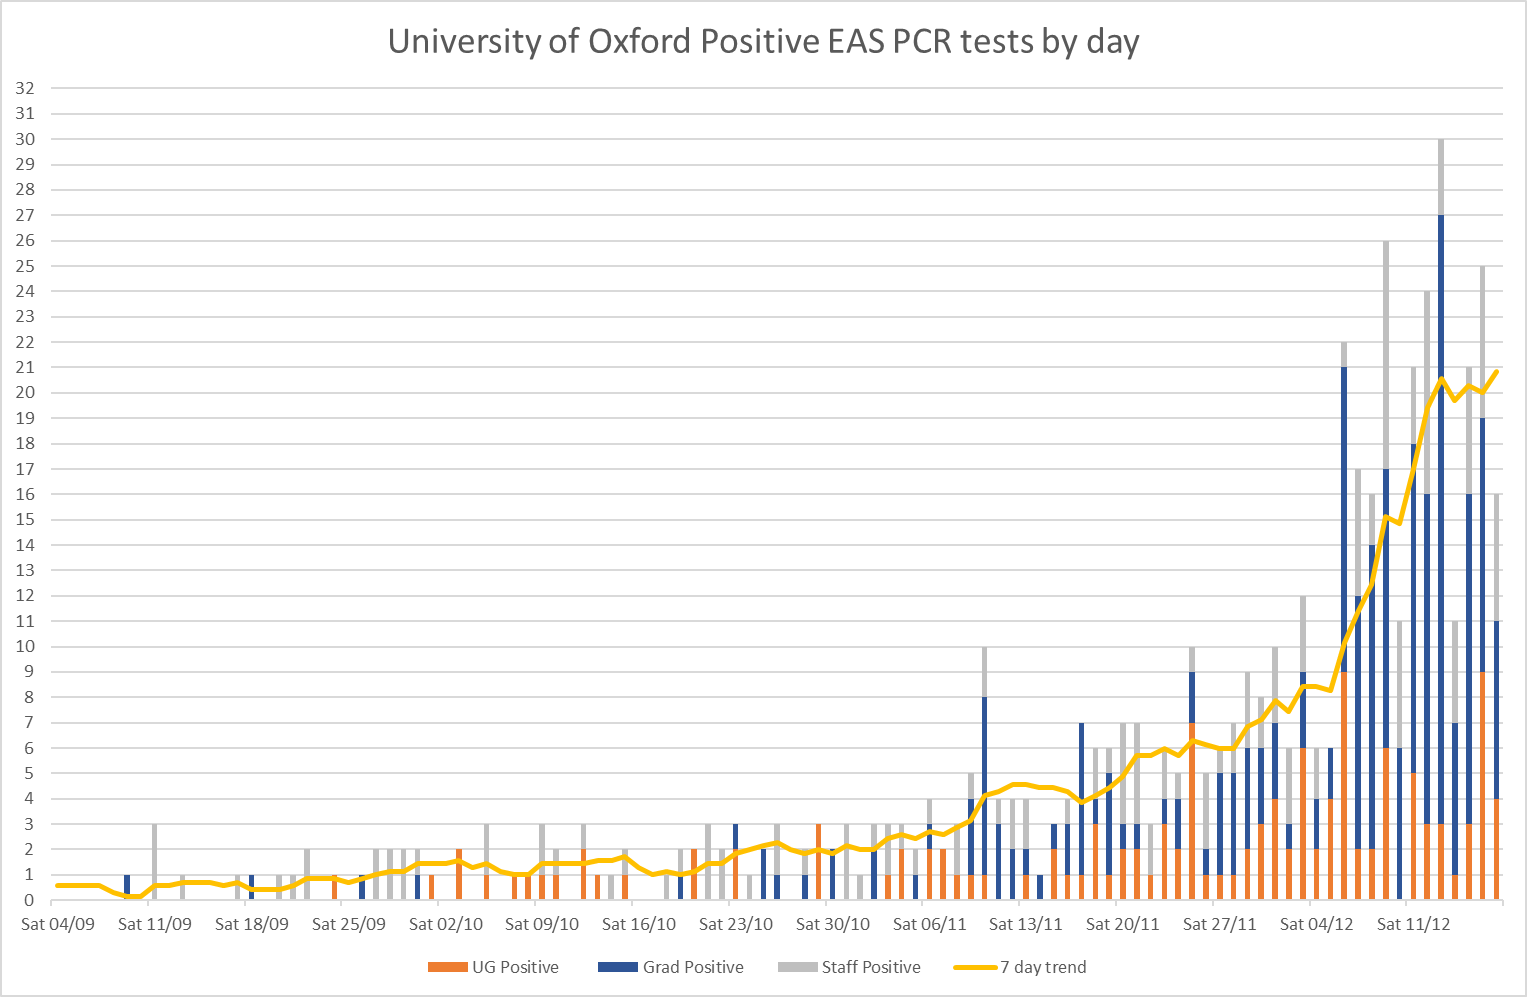 EAS PCR test data up to end of Friday 17 December